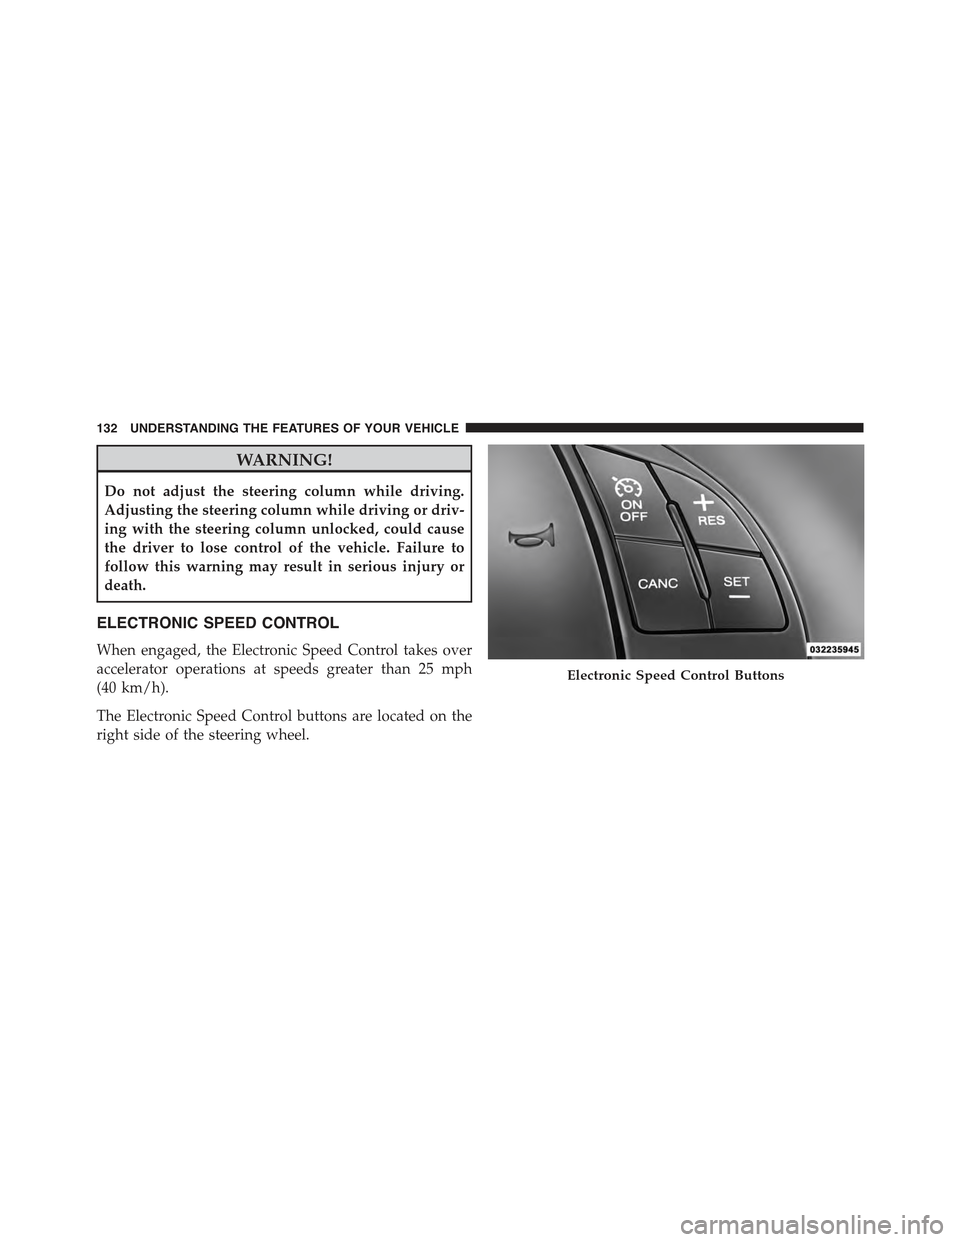 FIAT 500E 2015 2.G Owners Manual WARNING!
Do not adjust the steering column while driving.
Adjusting the steering column while driving or driv-
ing with the steering column unlocked, could cause
the driver to lose control of the vehi